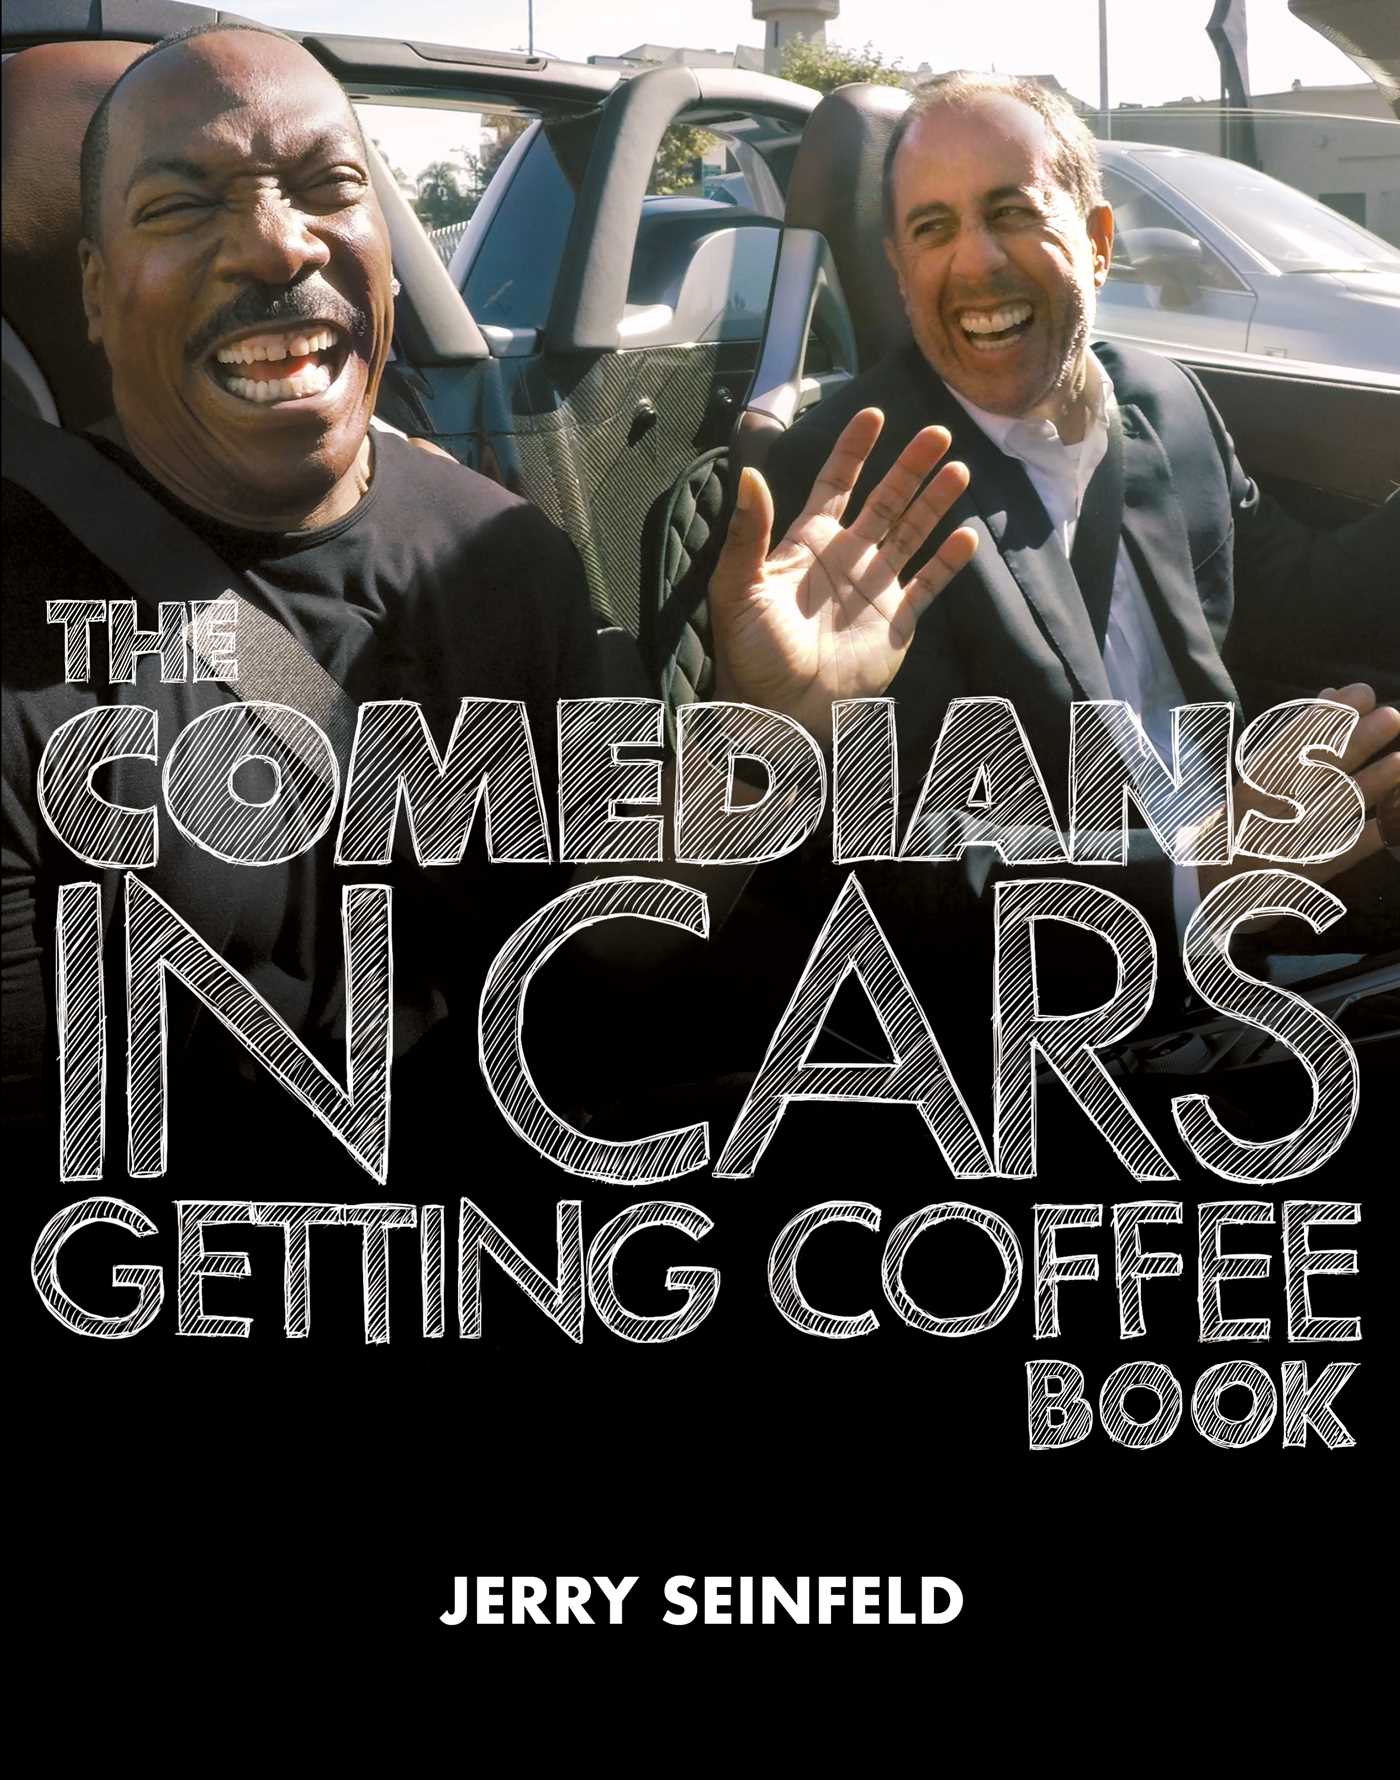 The Comedians in Cars Getting Coffee Book | Seinfeld, Jerry